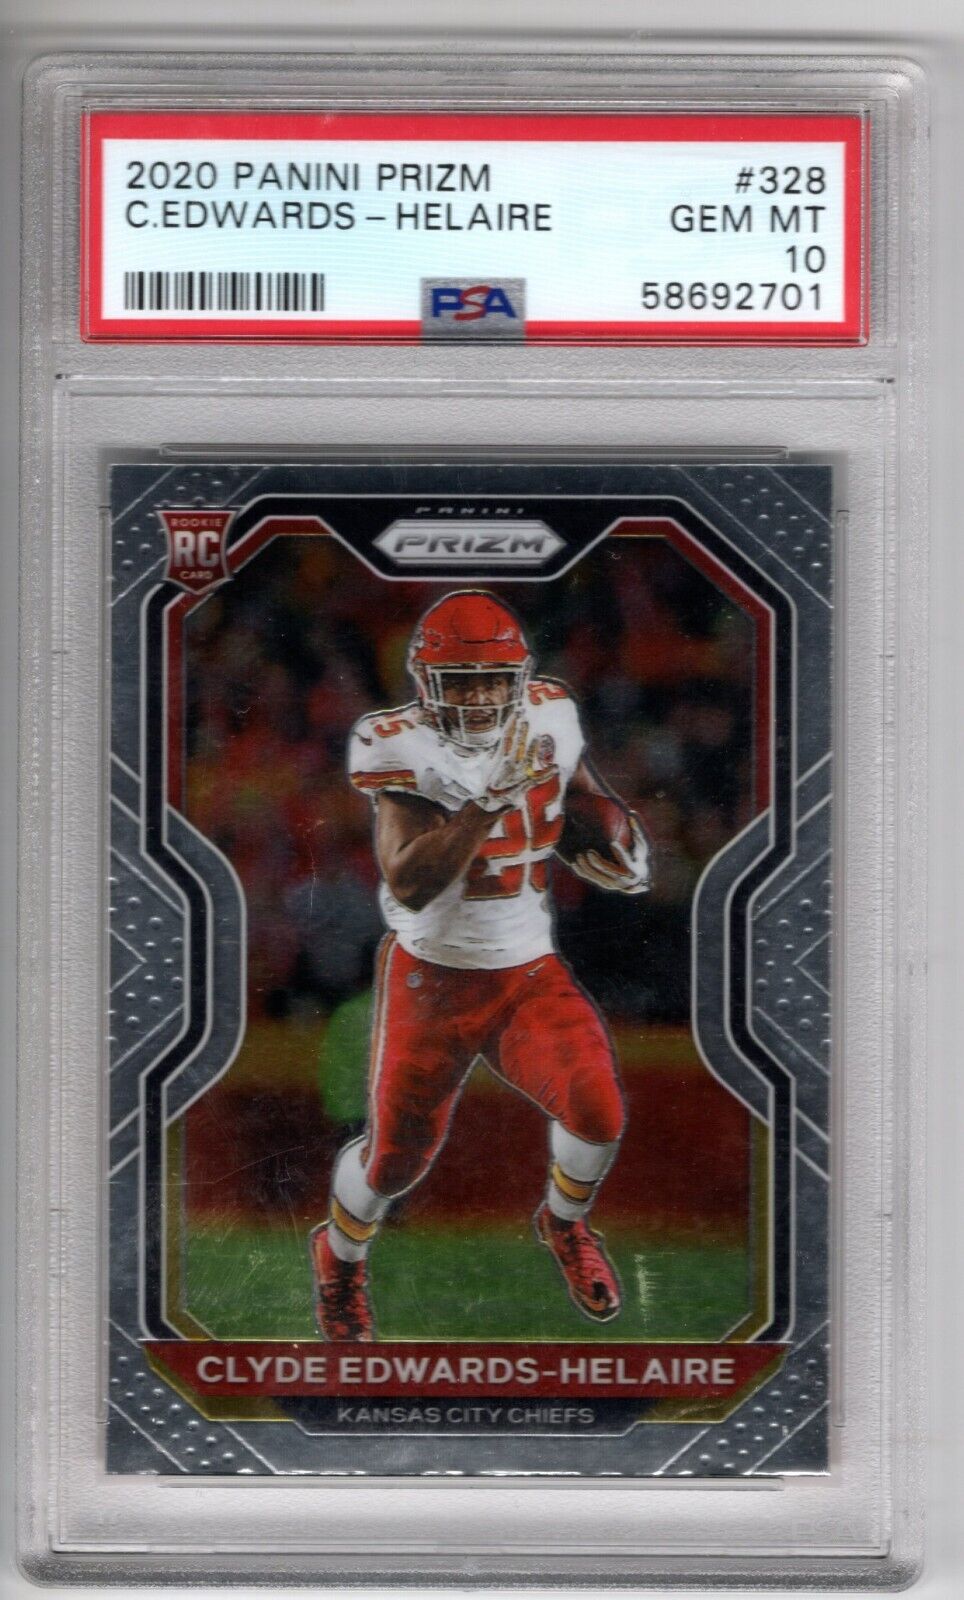 2020 Panini Prizm Football #328 Clyde Edwards-Helaire Rookie Card RC PSA 10 - 643-collectibles